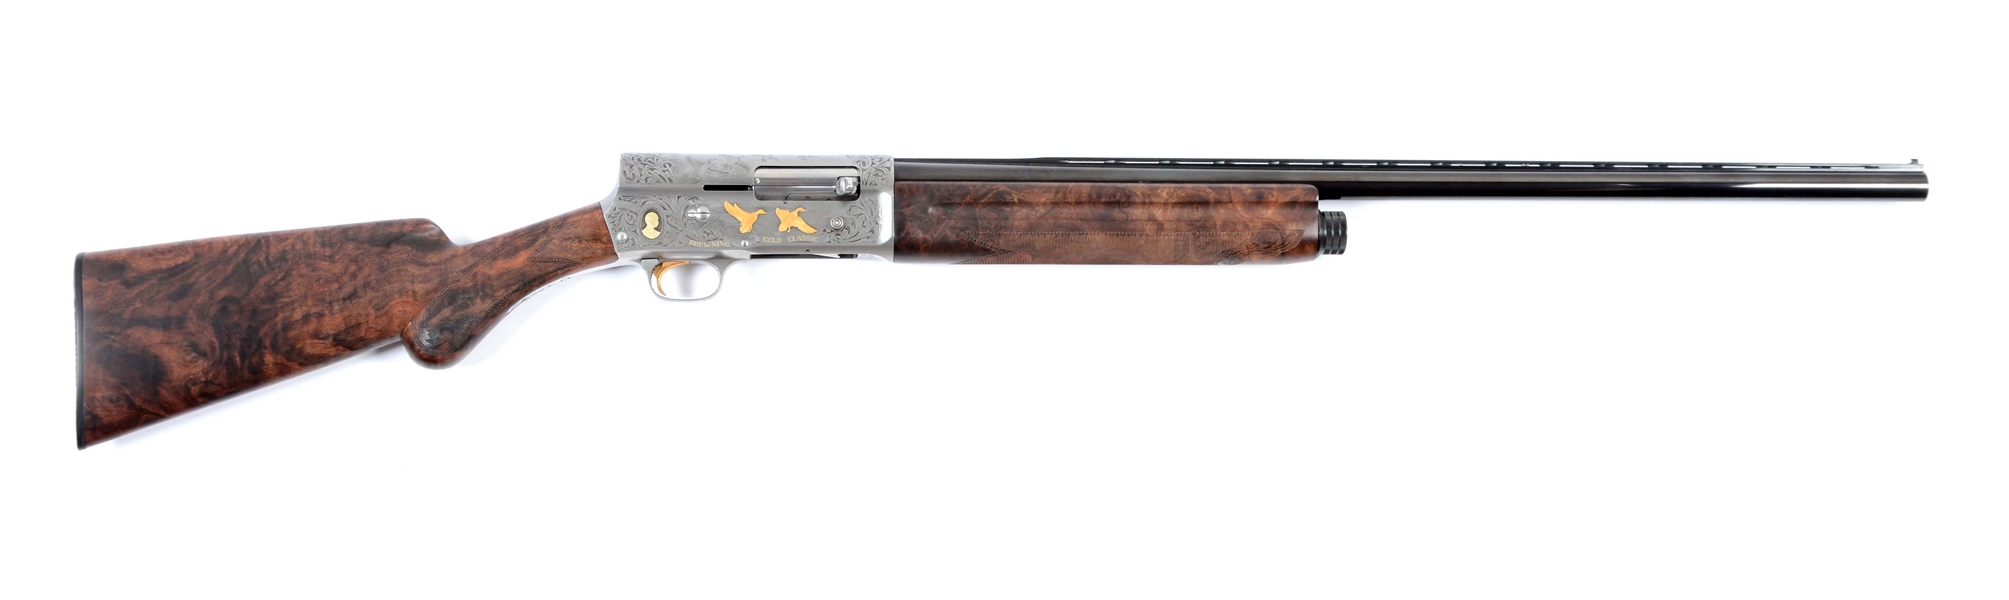 (M) MIB BELGIAN BROWNING A-5 GOLD CLASSIC ONE OF FIVE HUNDRED SEMI-AUTOMATIC SHOTGUN.